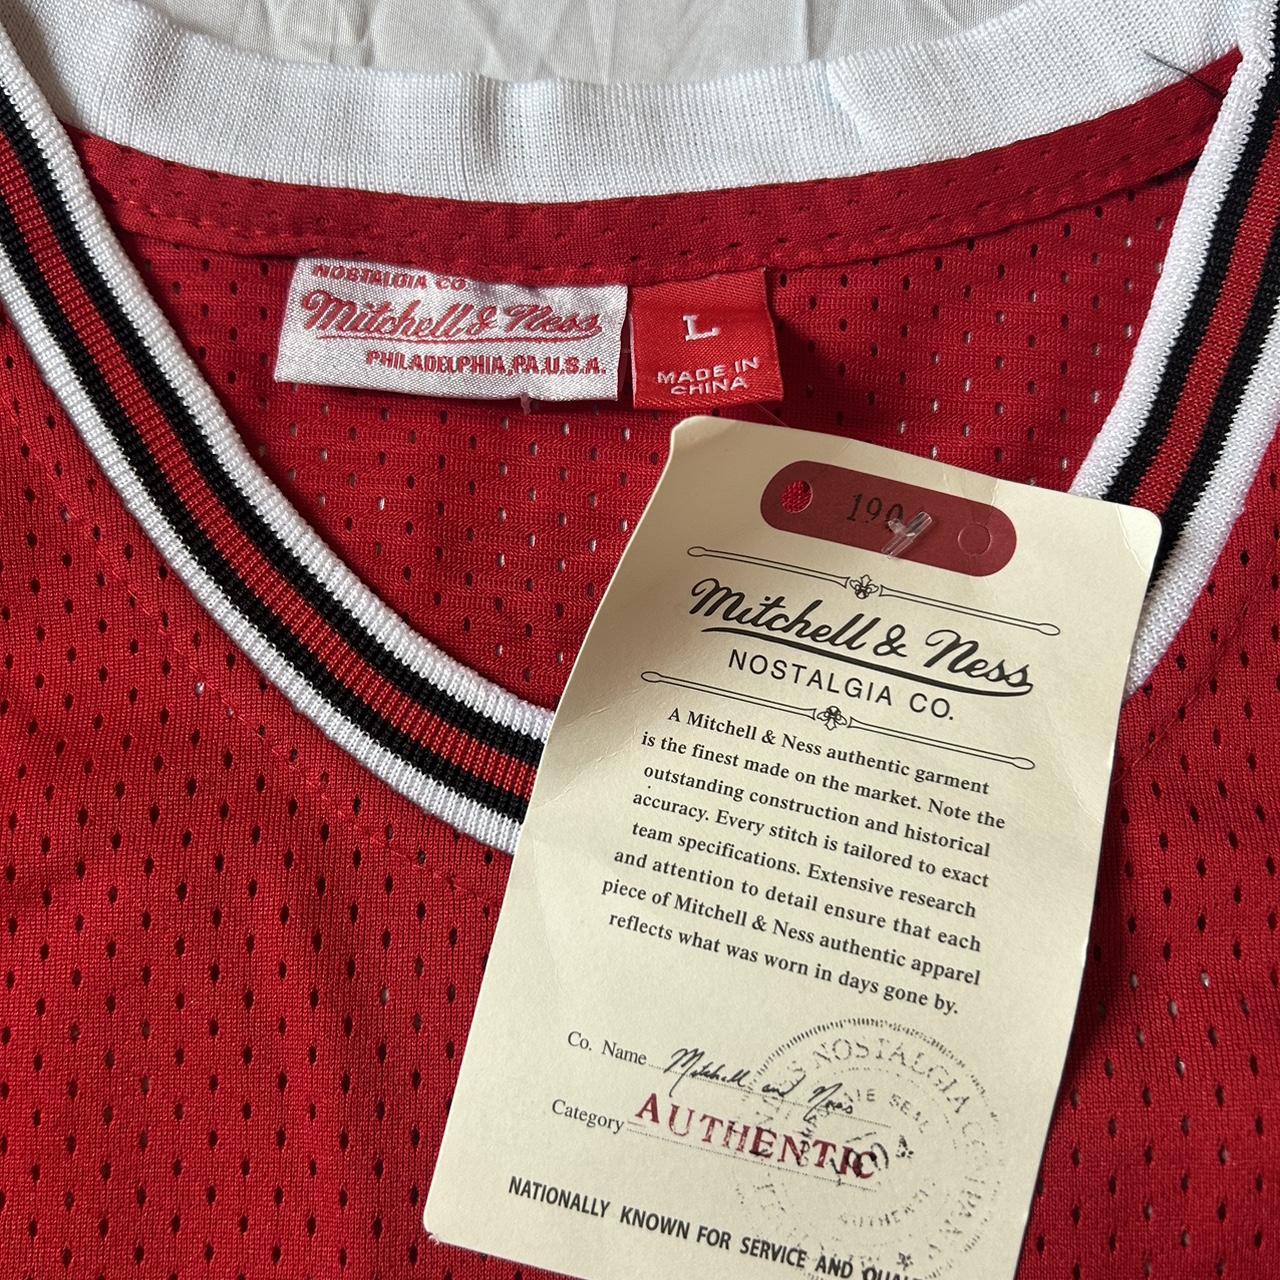 Mitchell & Ness Men's Top - Red - L